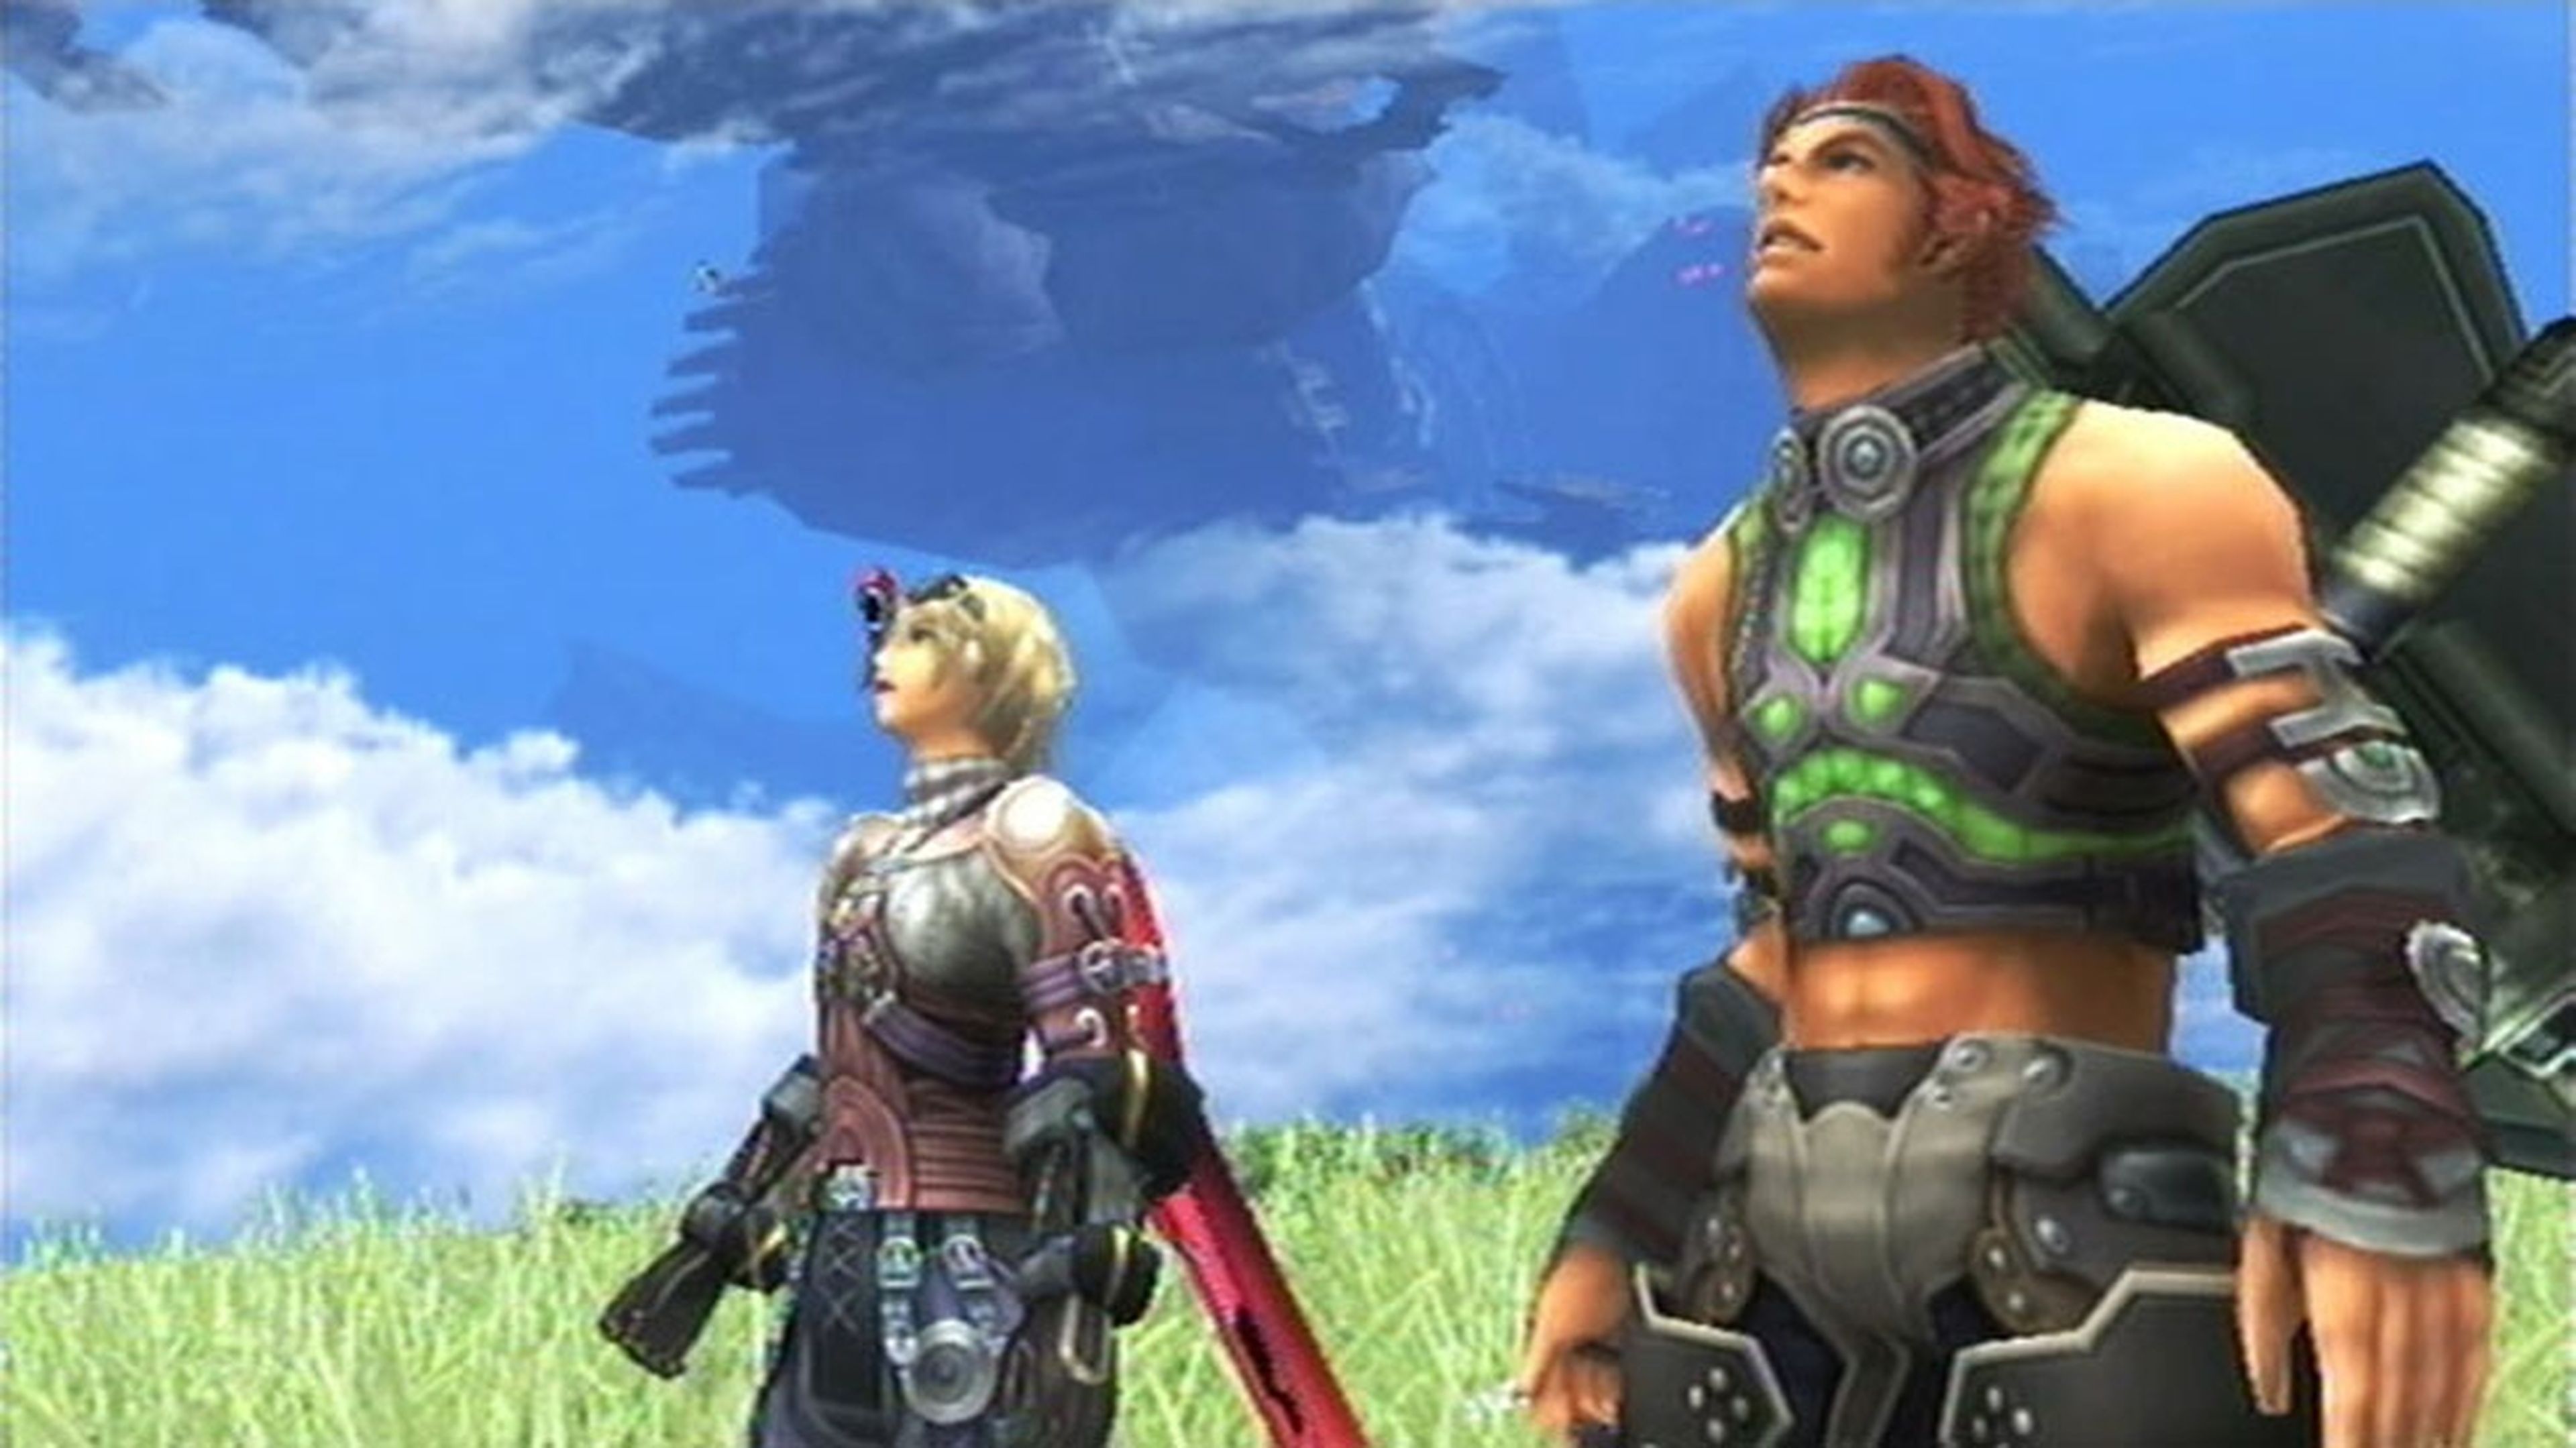 New Nintendo 3DS XL - Xenoblade Chronicles 3D_ Your Will Shall Be Done Trailer